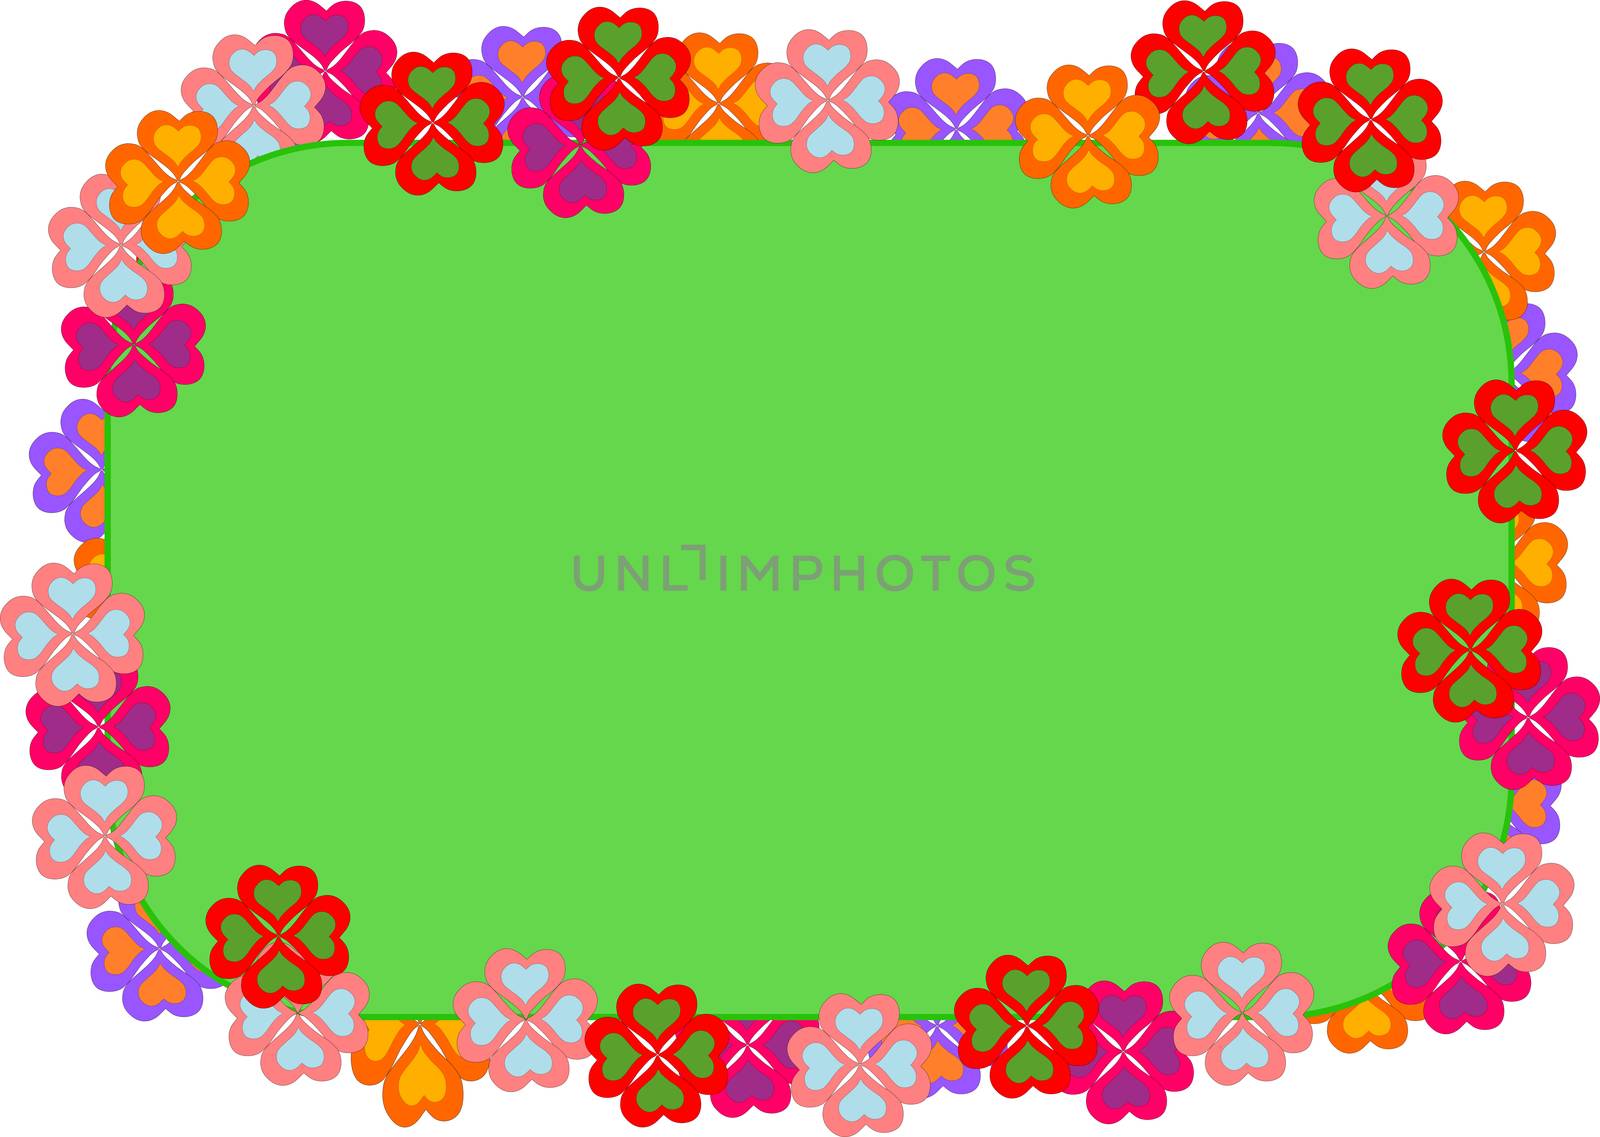 Board with frame made of red and yellow flowers isolated. Border made of flowers-carnations,forget-me-nots,gerbera,asters isolated on a white background